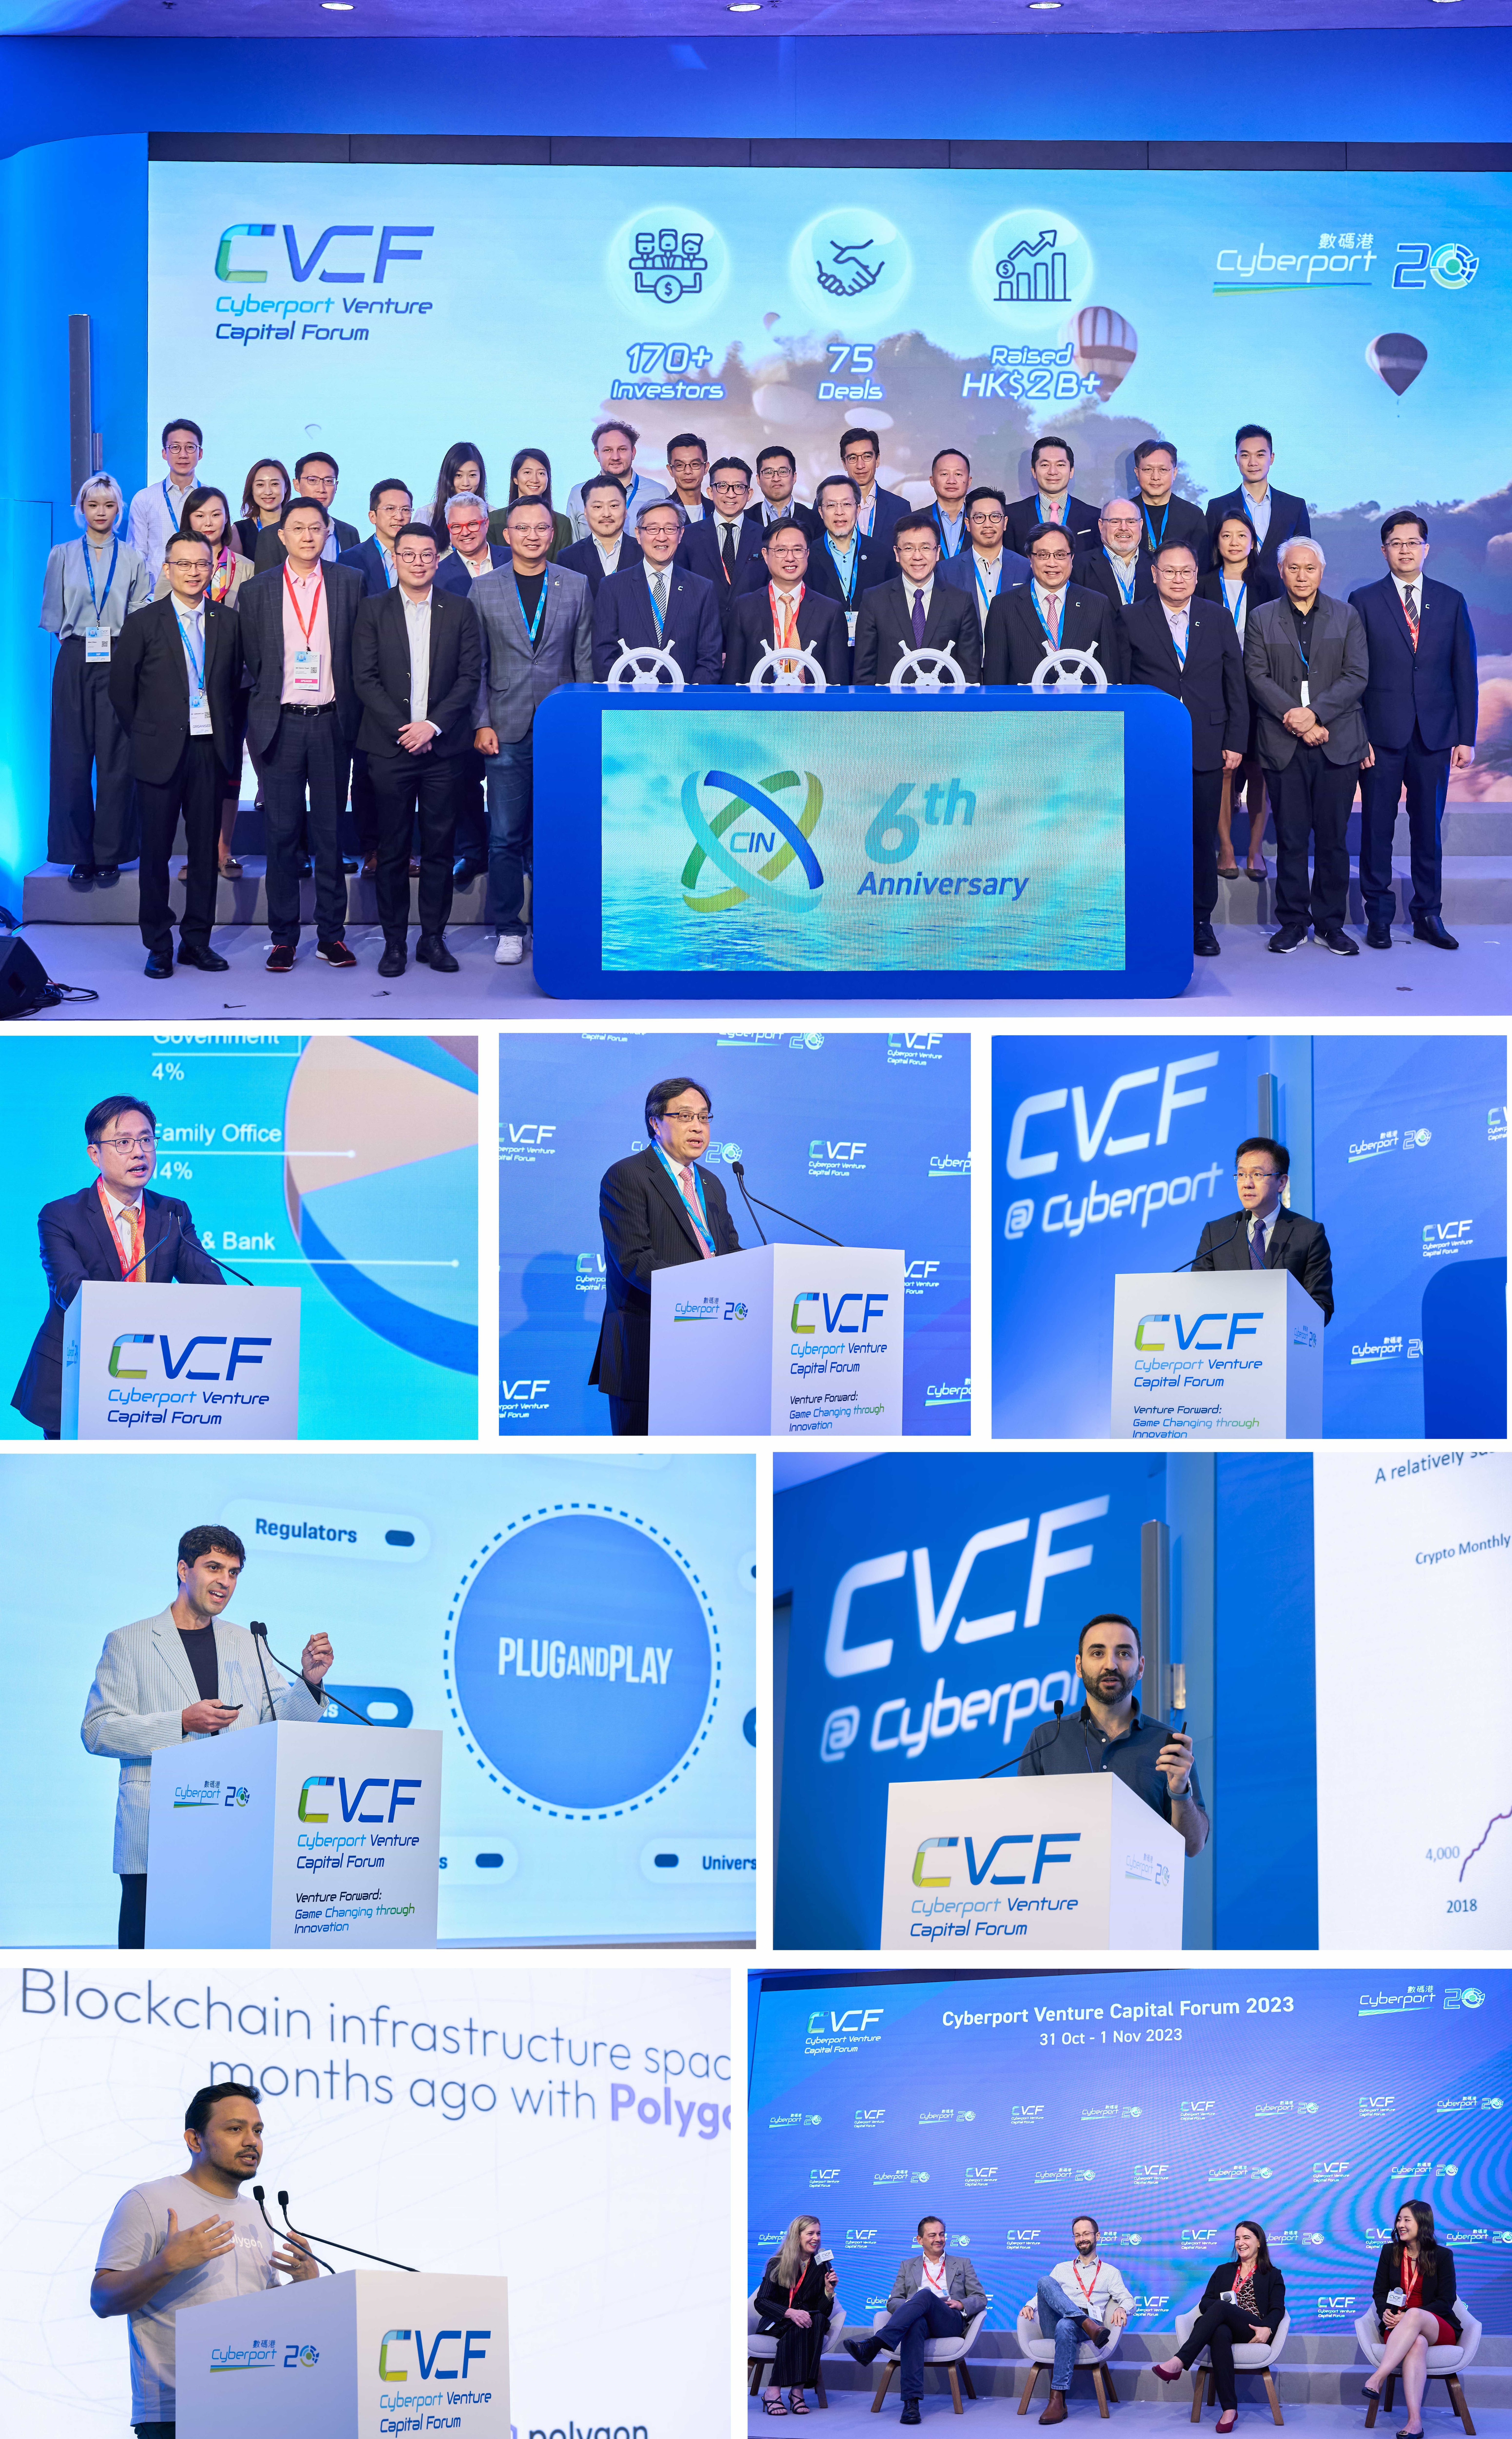 Cyberport Venture Capital Forum 2023 (CVCF) kicked off on October 31, discussing prospects and strategies for the venture capital market to capitalise on the emerging technologies and the global economic momentum that is shifting eastward, focusing on the Middle East, ASEAN, and the Guangdong-Hong Kong-Macau Greater Bay Area. The 6th Anniversary Celebration of the Cyberport Investors Network (CIN) was held on the same day